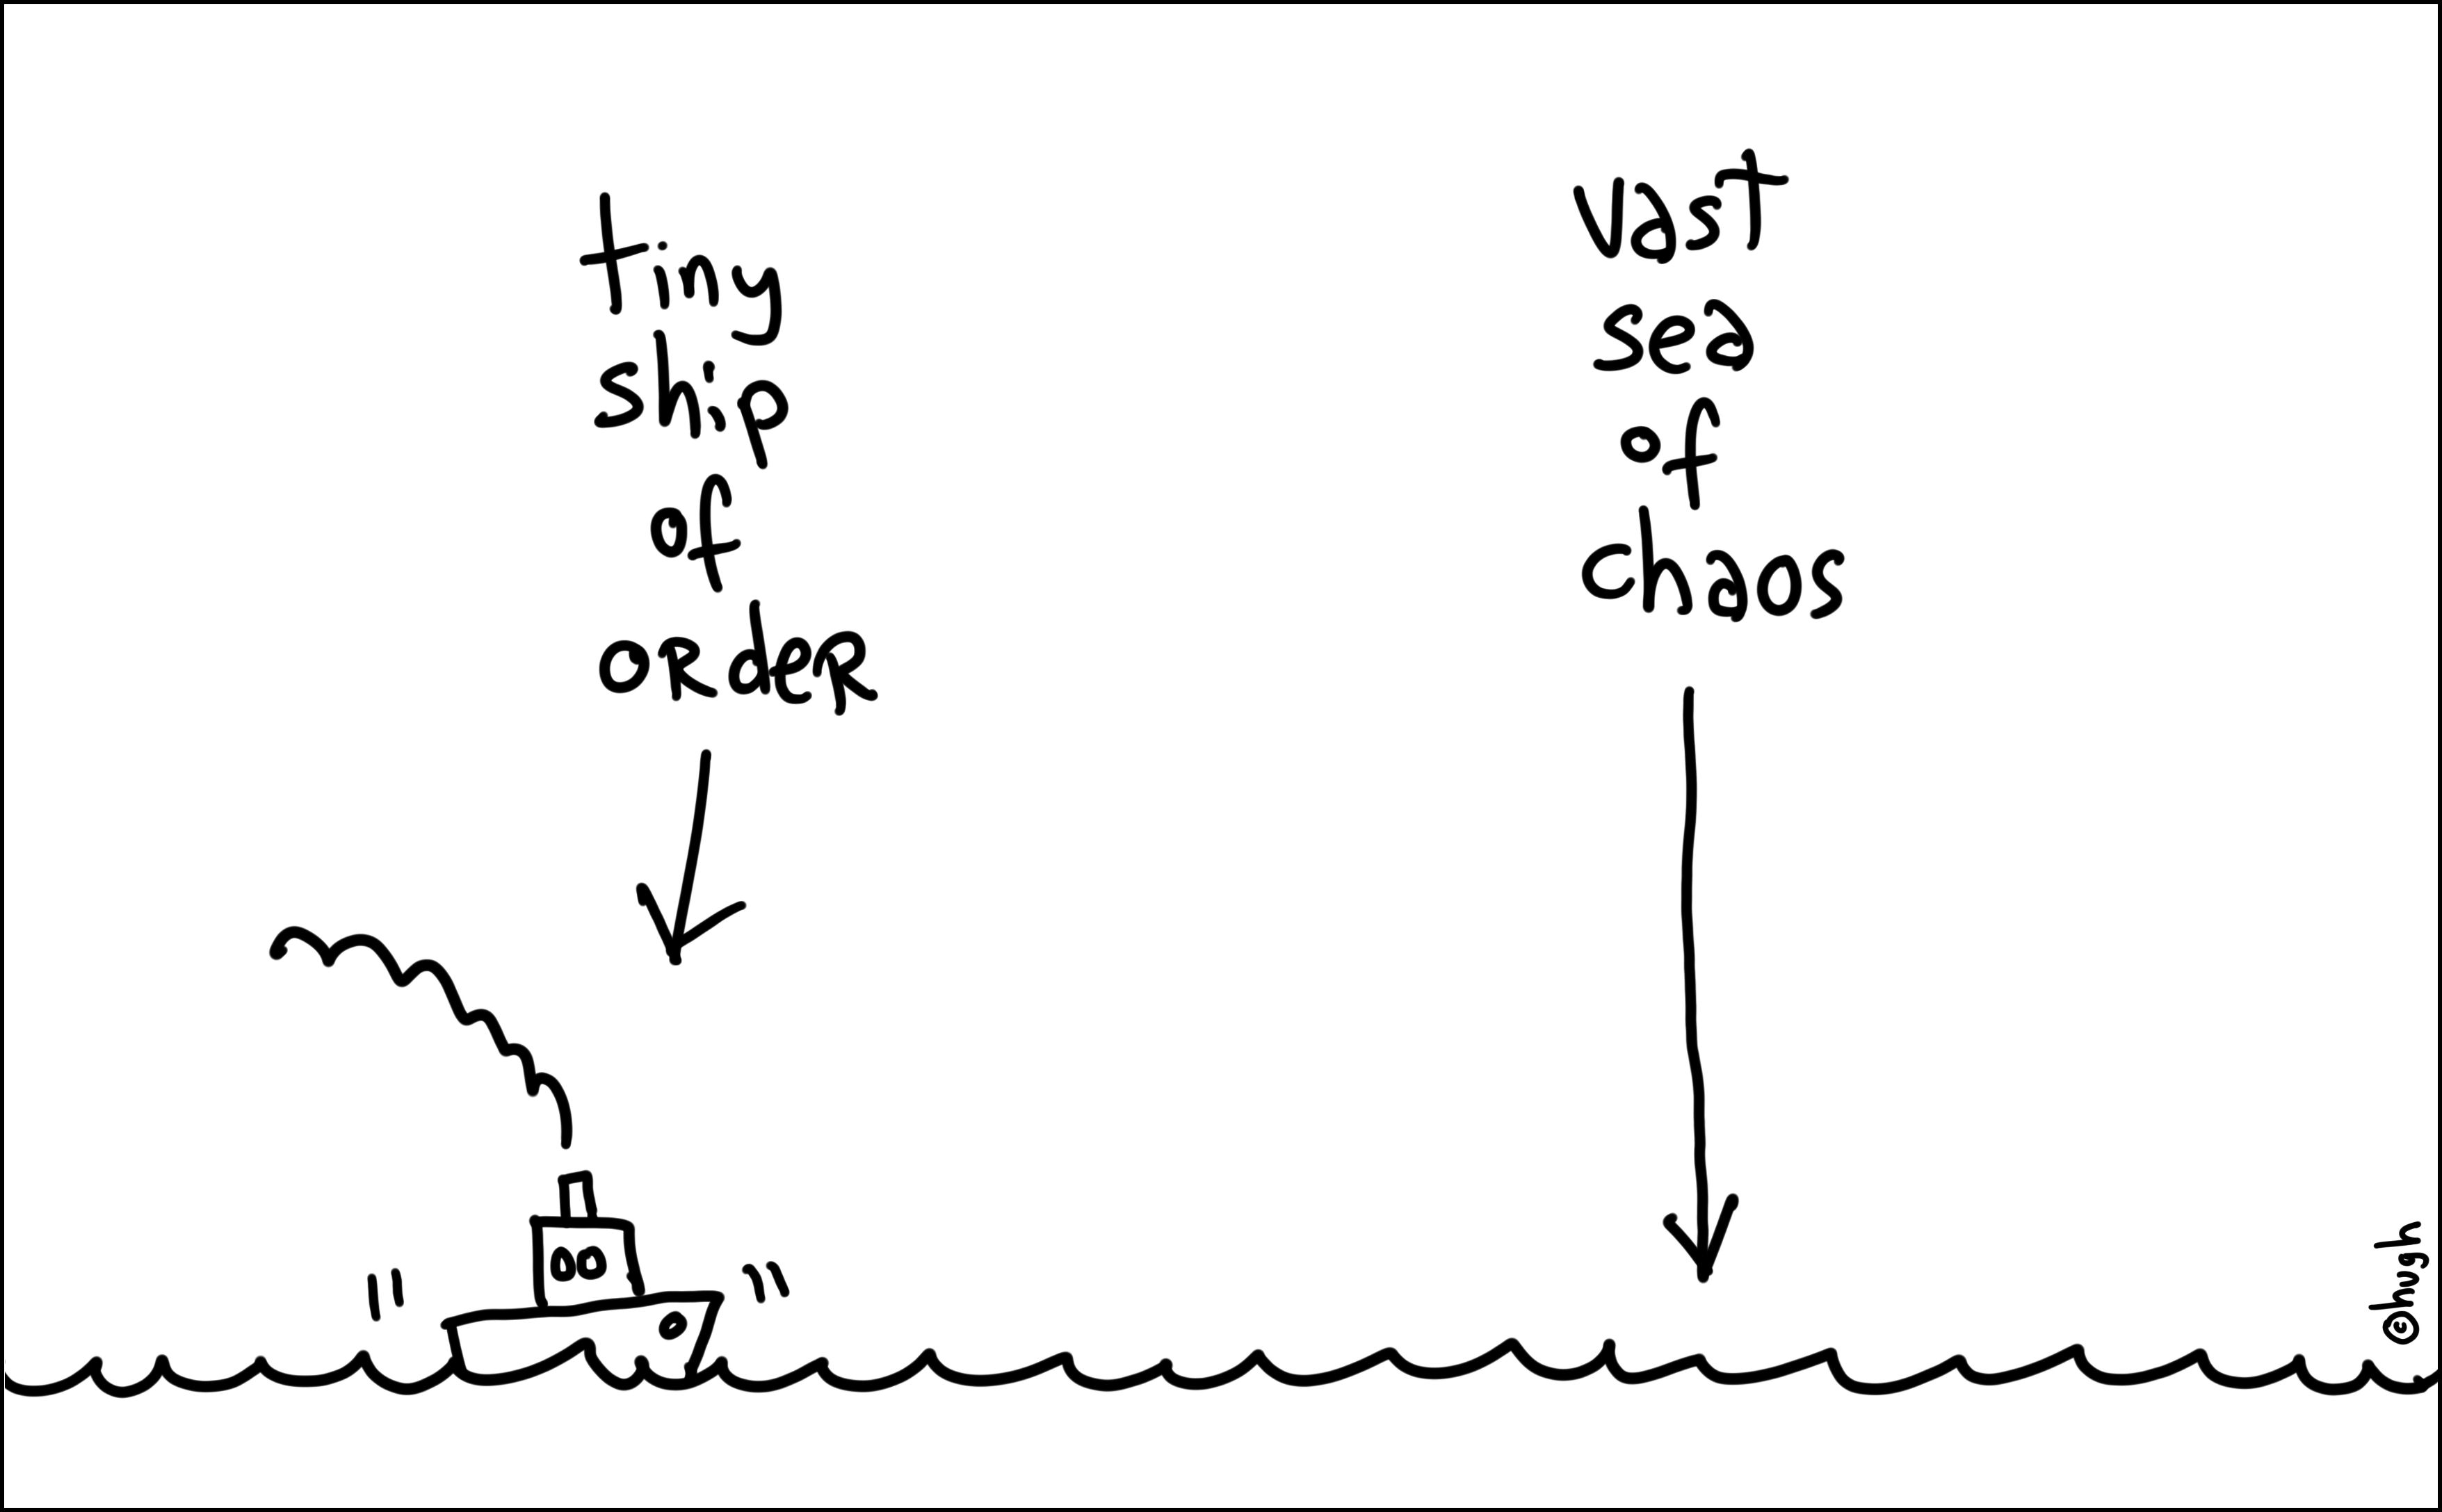 A tiny ship of order in a vast sea of chaos